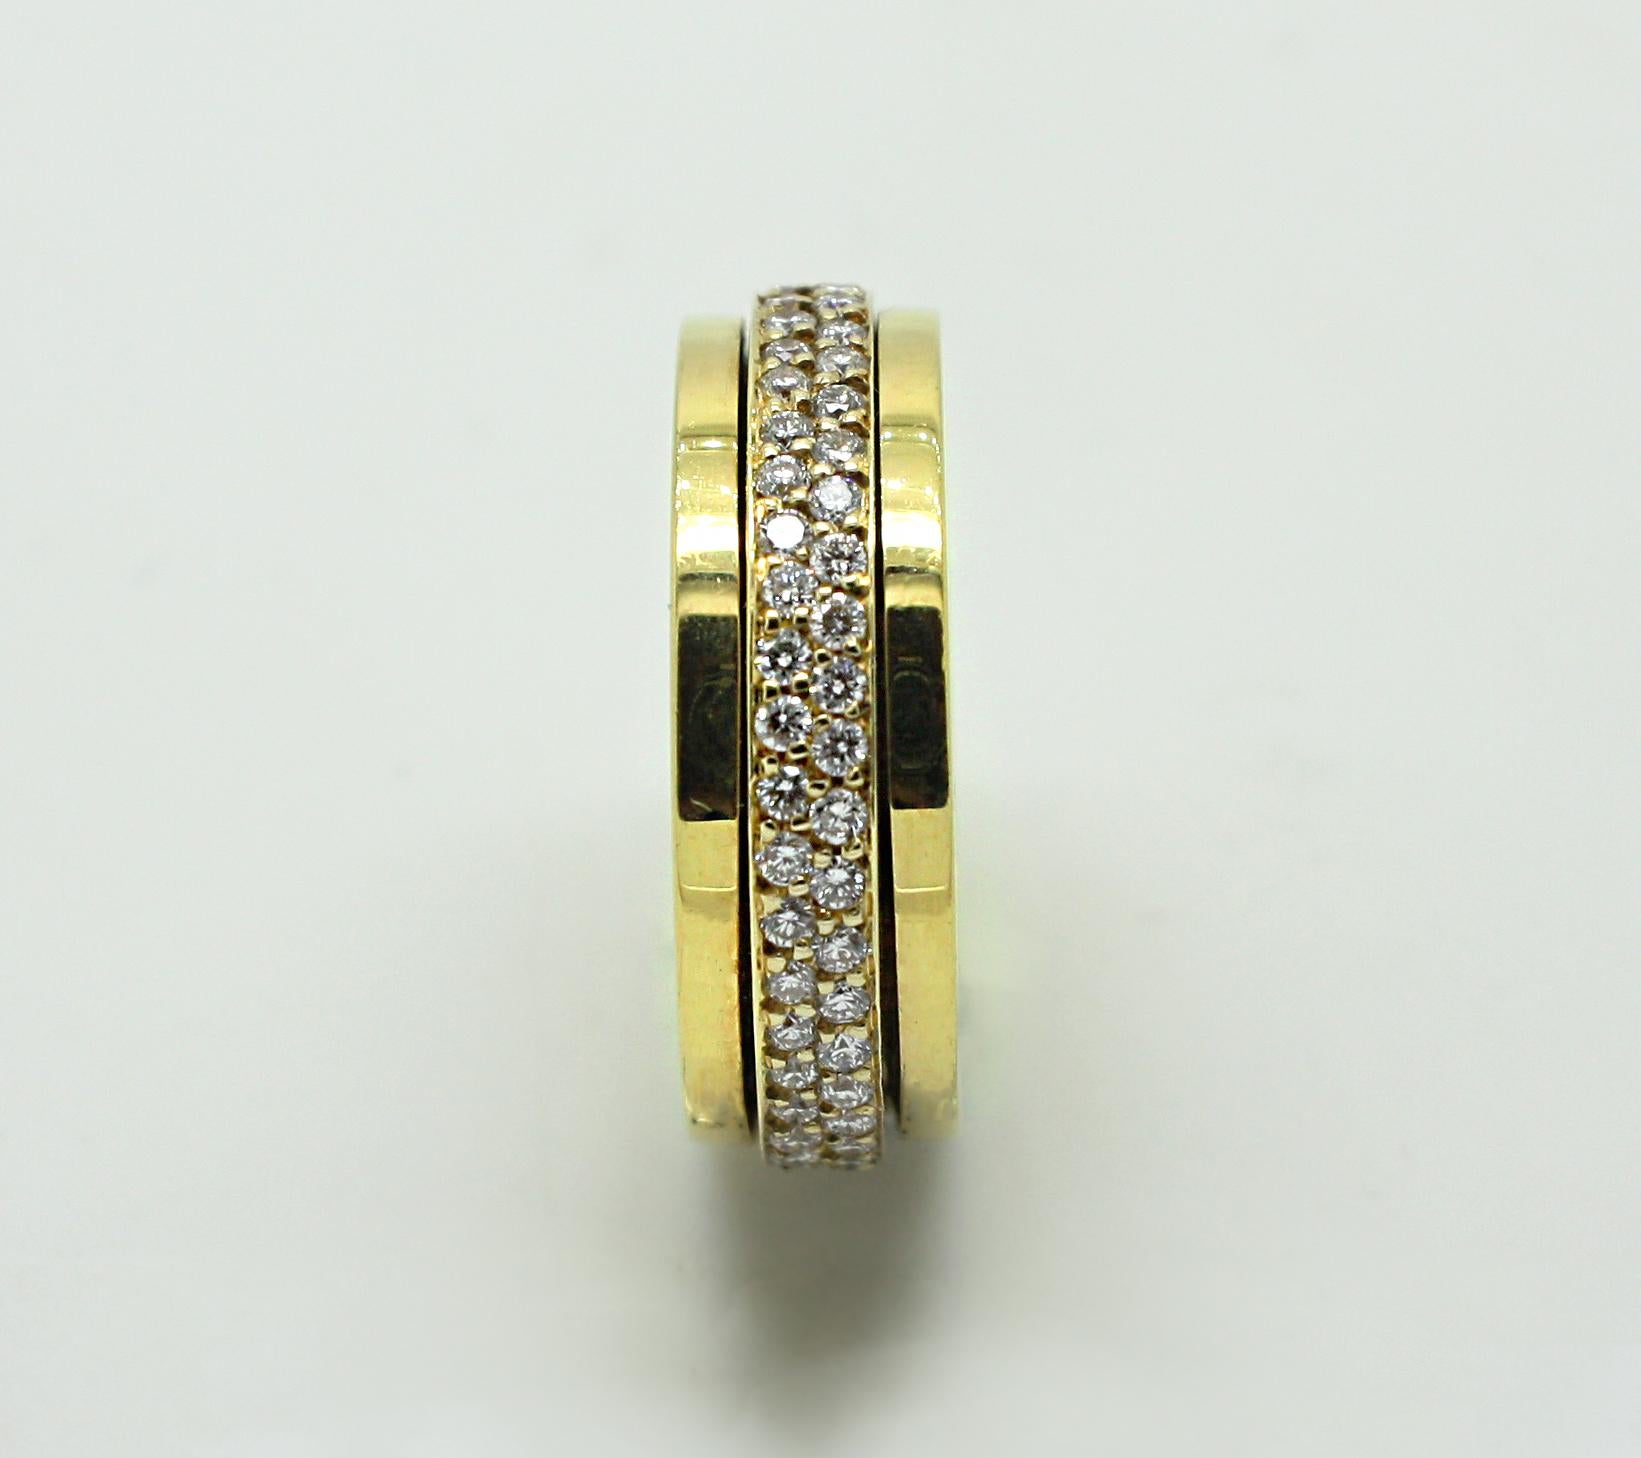 S.Georgios designer 18 Karat Yellow Gold Eternity Diamond Band Ring is all handmade and has a diamond bezel that spins freely in the middle. The gorgeous band features brilliant cut white diamonds total weight of 0.95 Carat in a microscopic